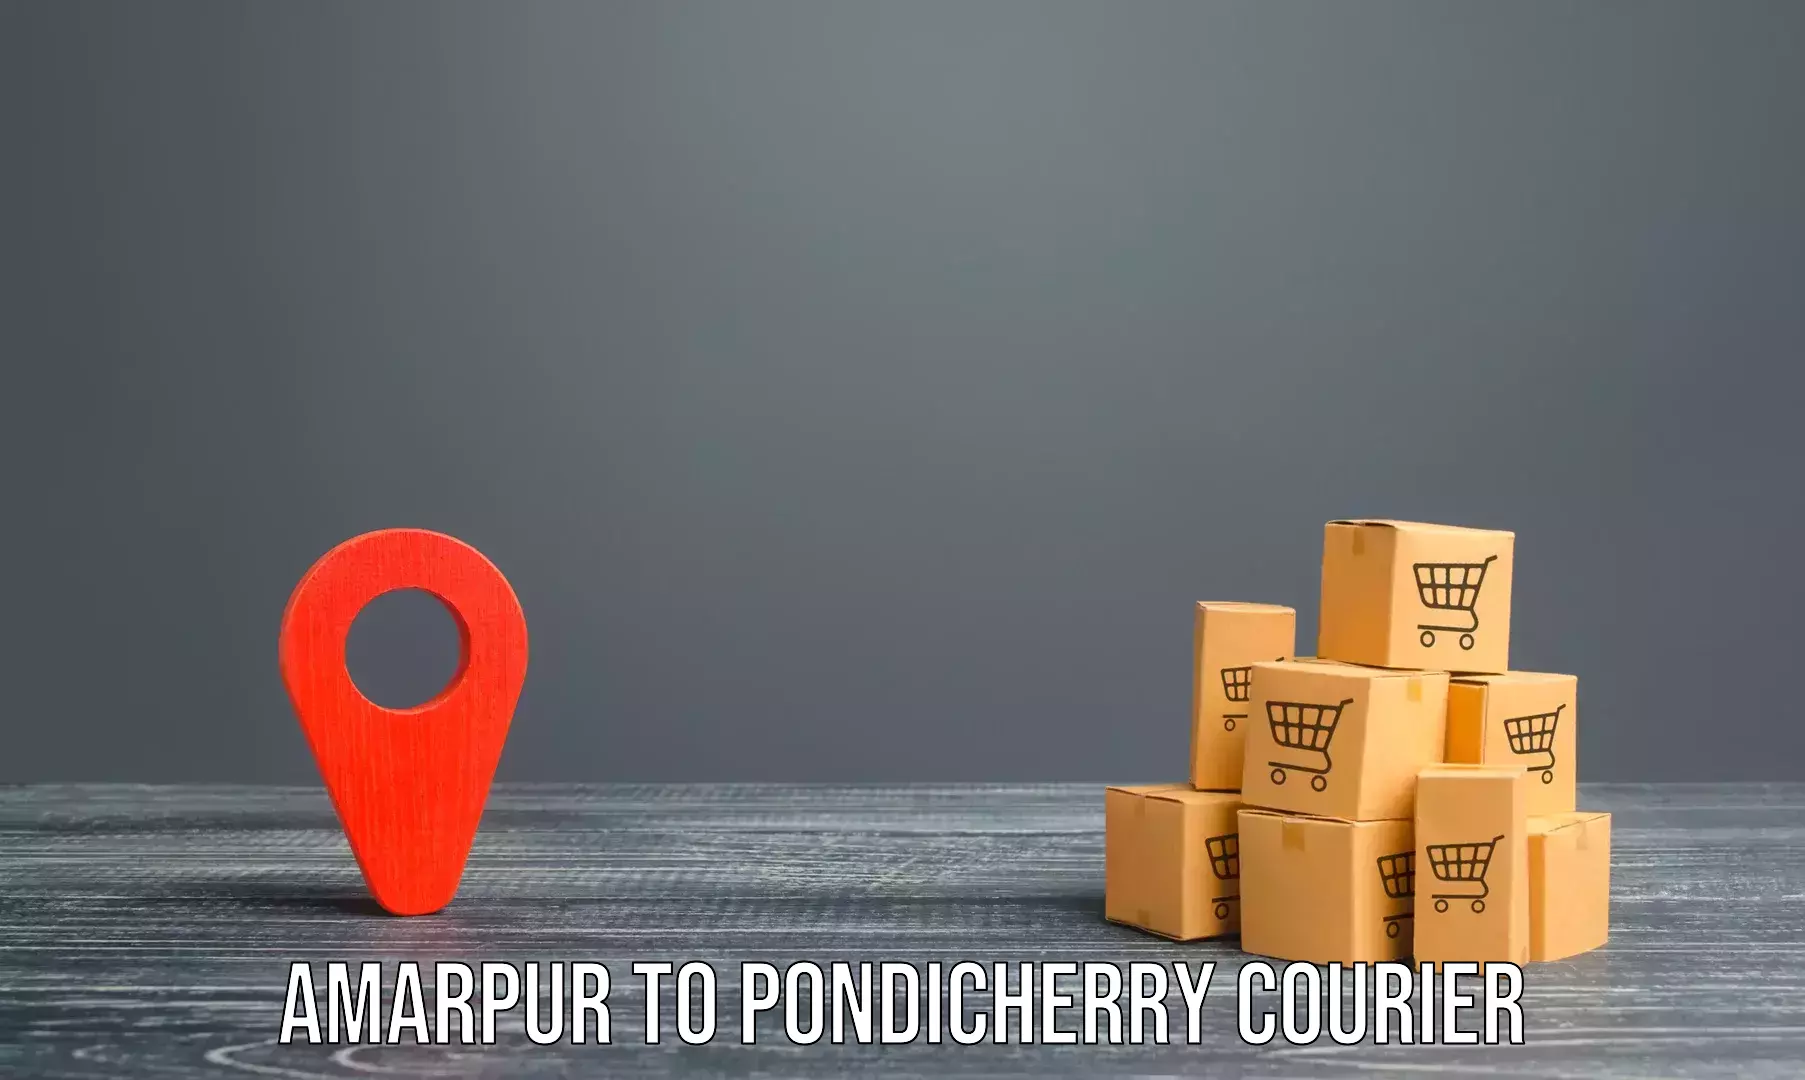 Expert furniture movers in Amarpur to Pondicherry